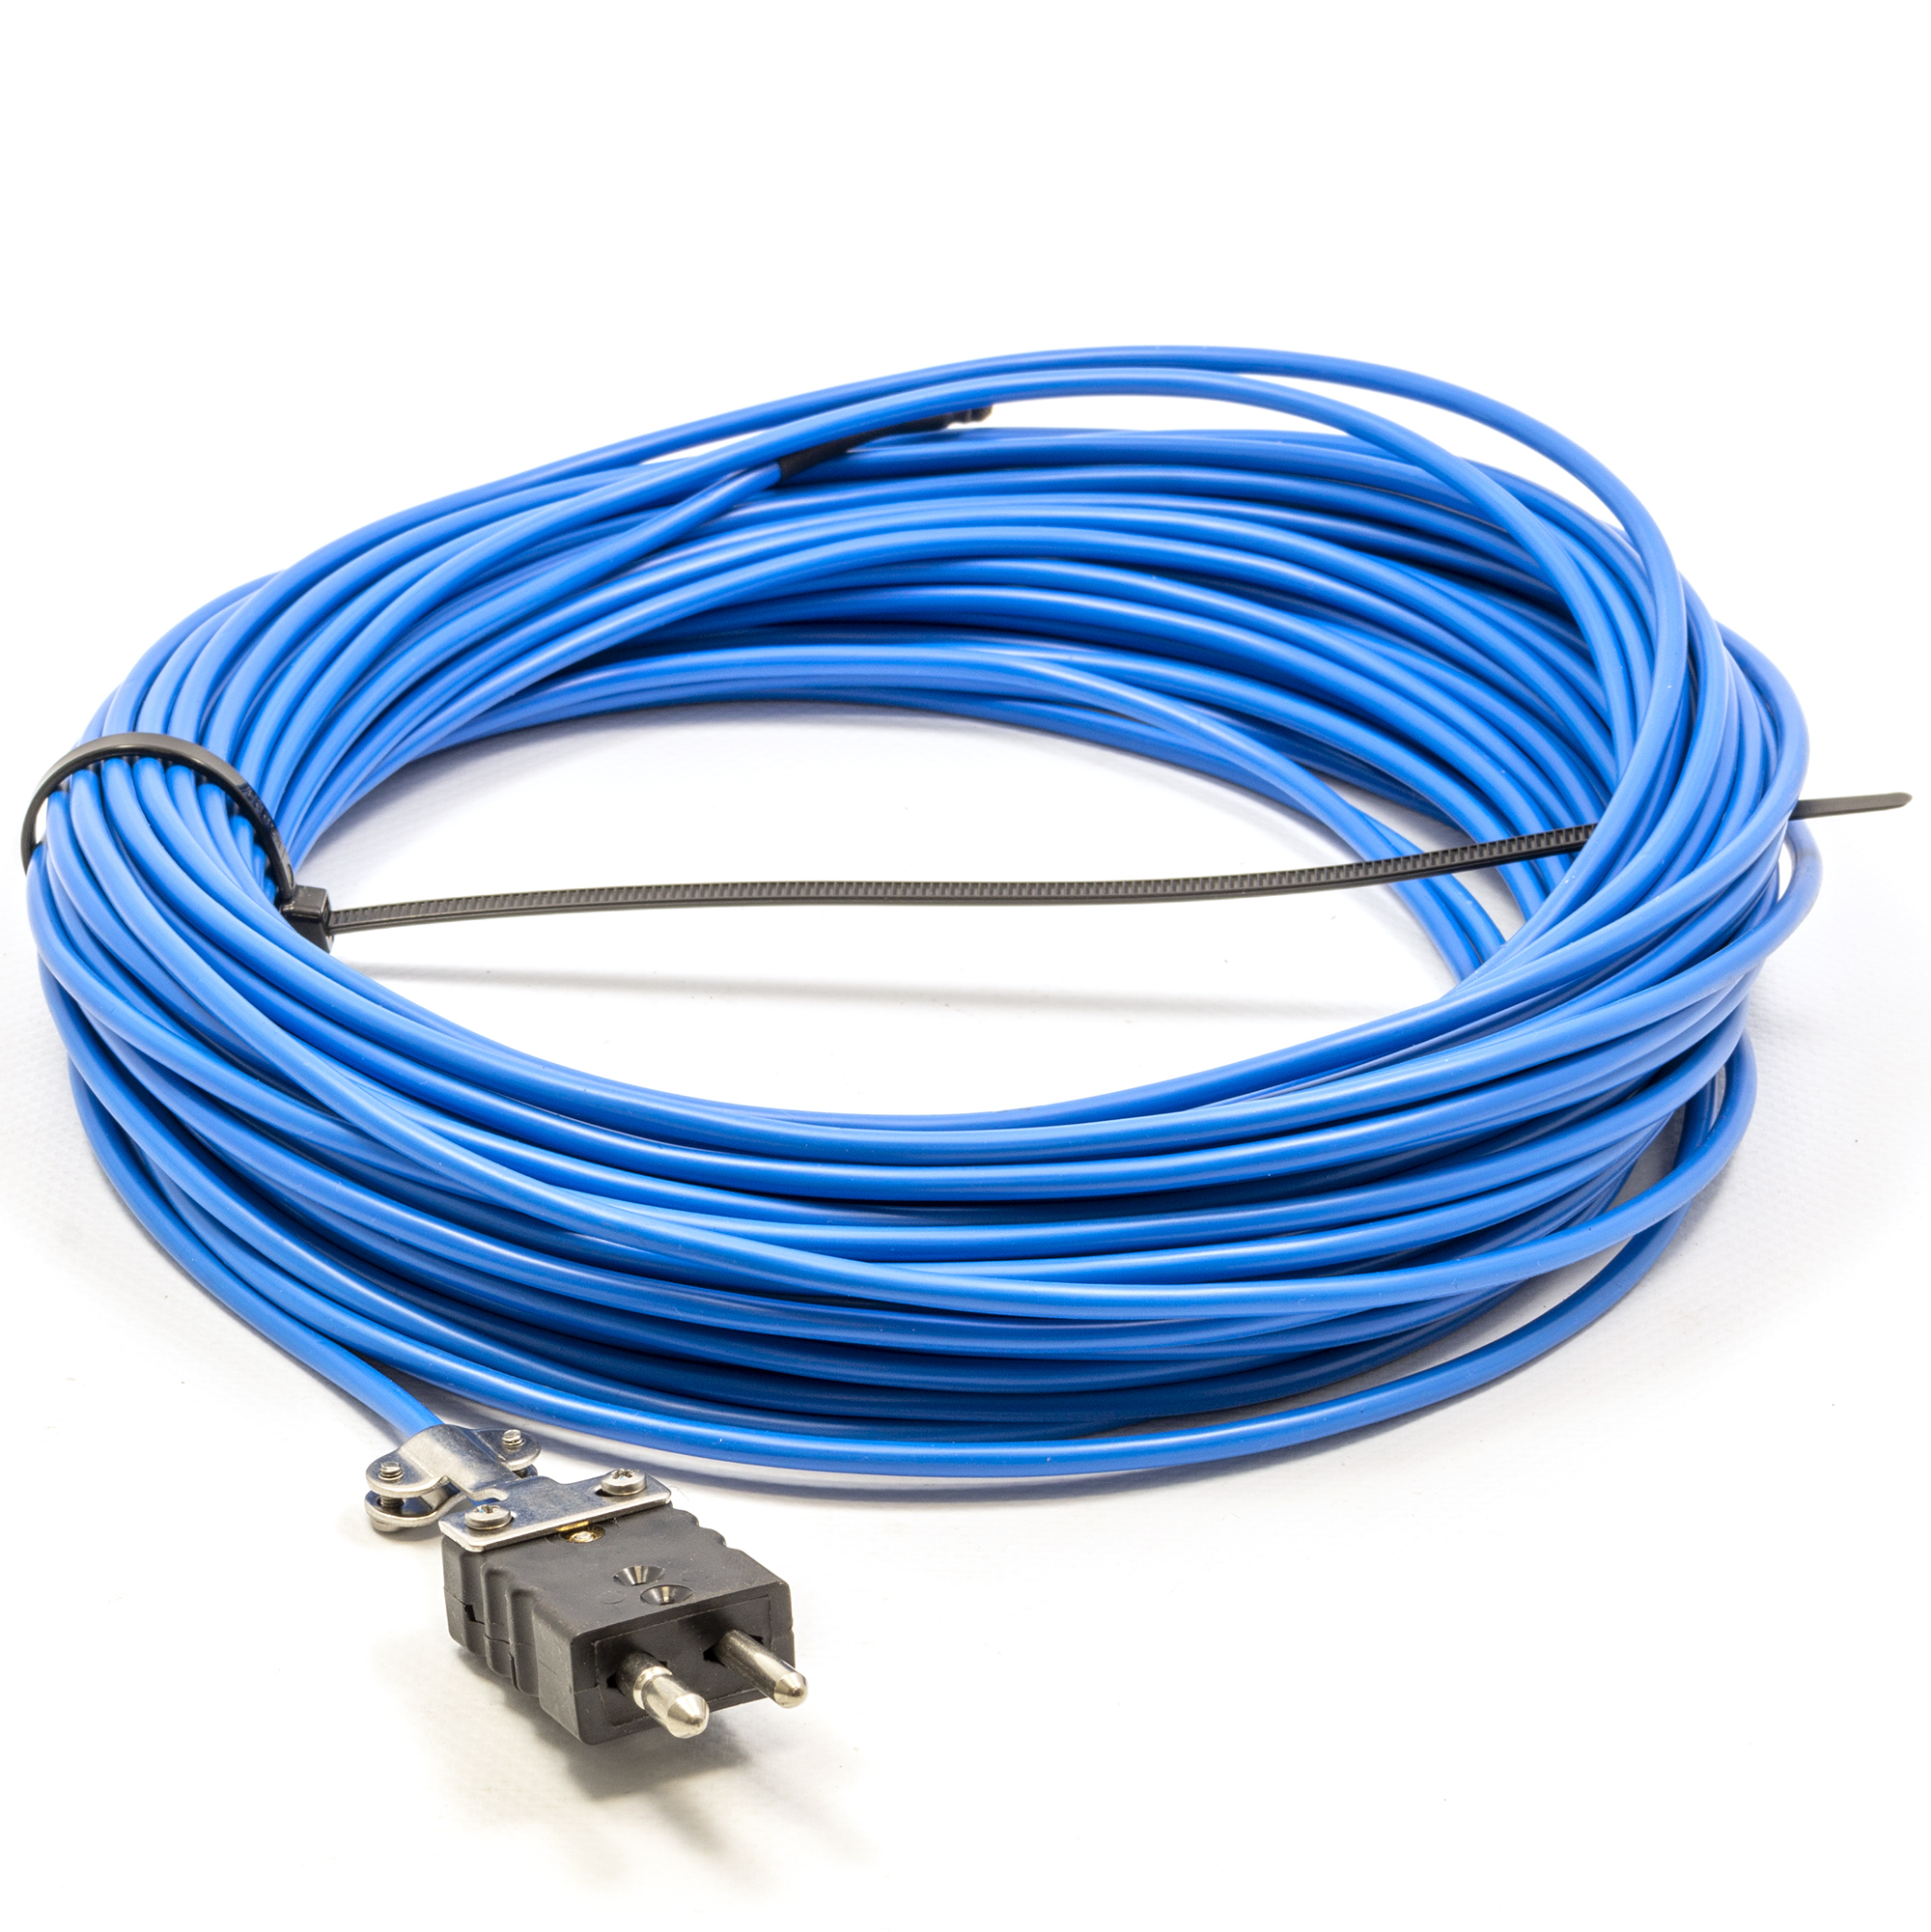 ABMR 000493 Thermocouple cable L2K Fe-C uNi, 25 mtr incl. connector with strain relief